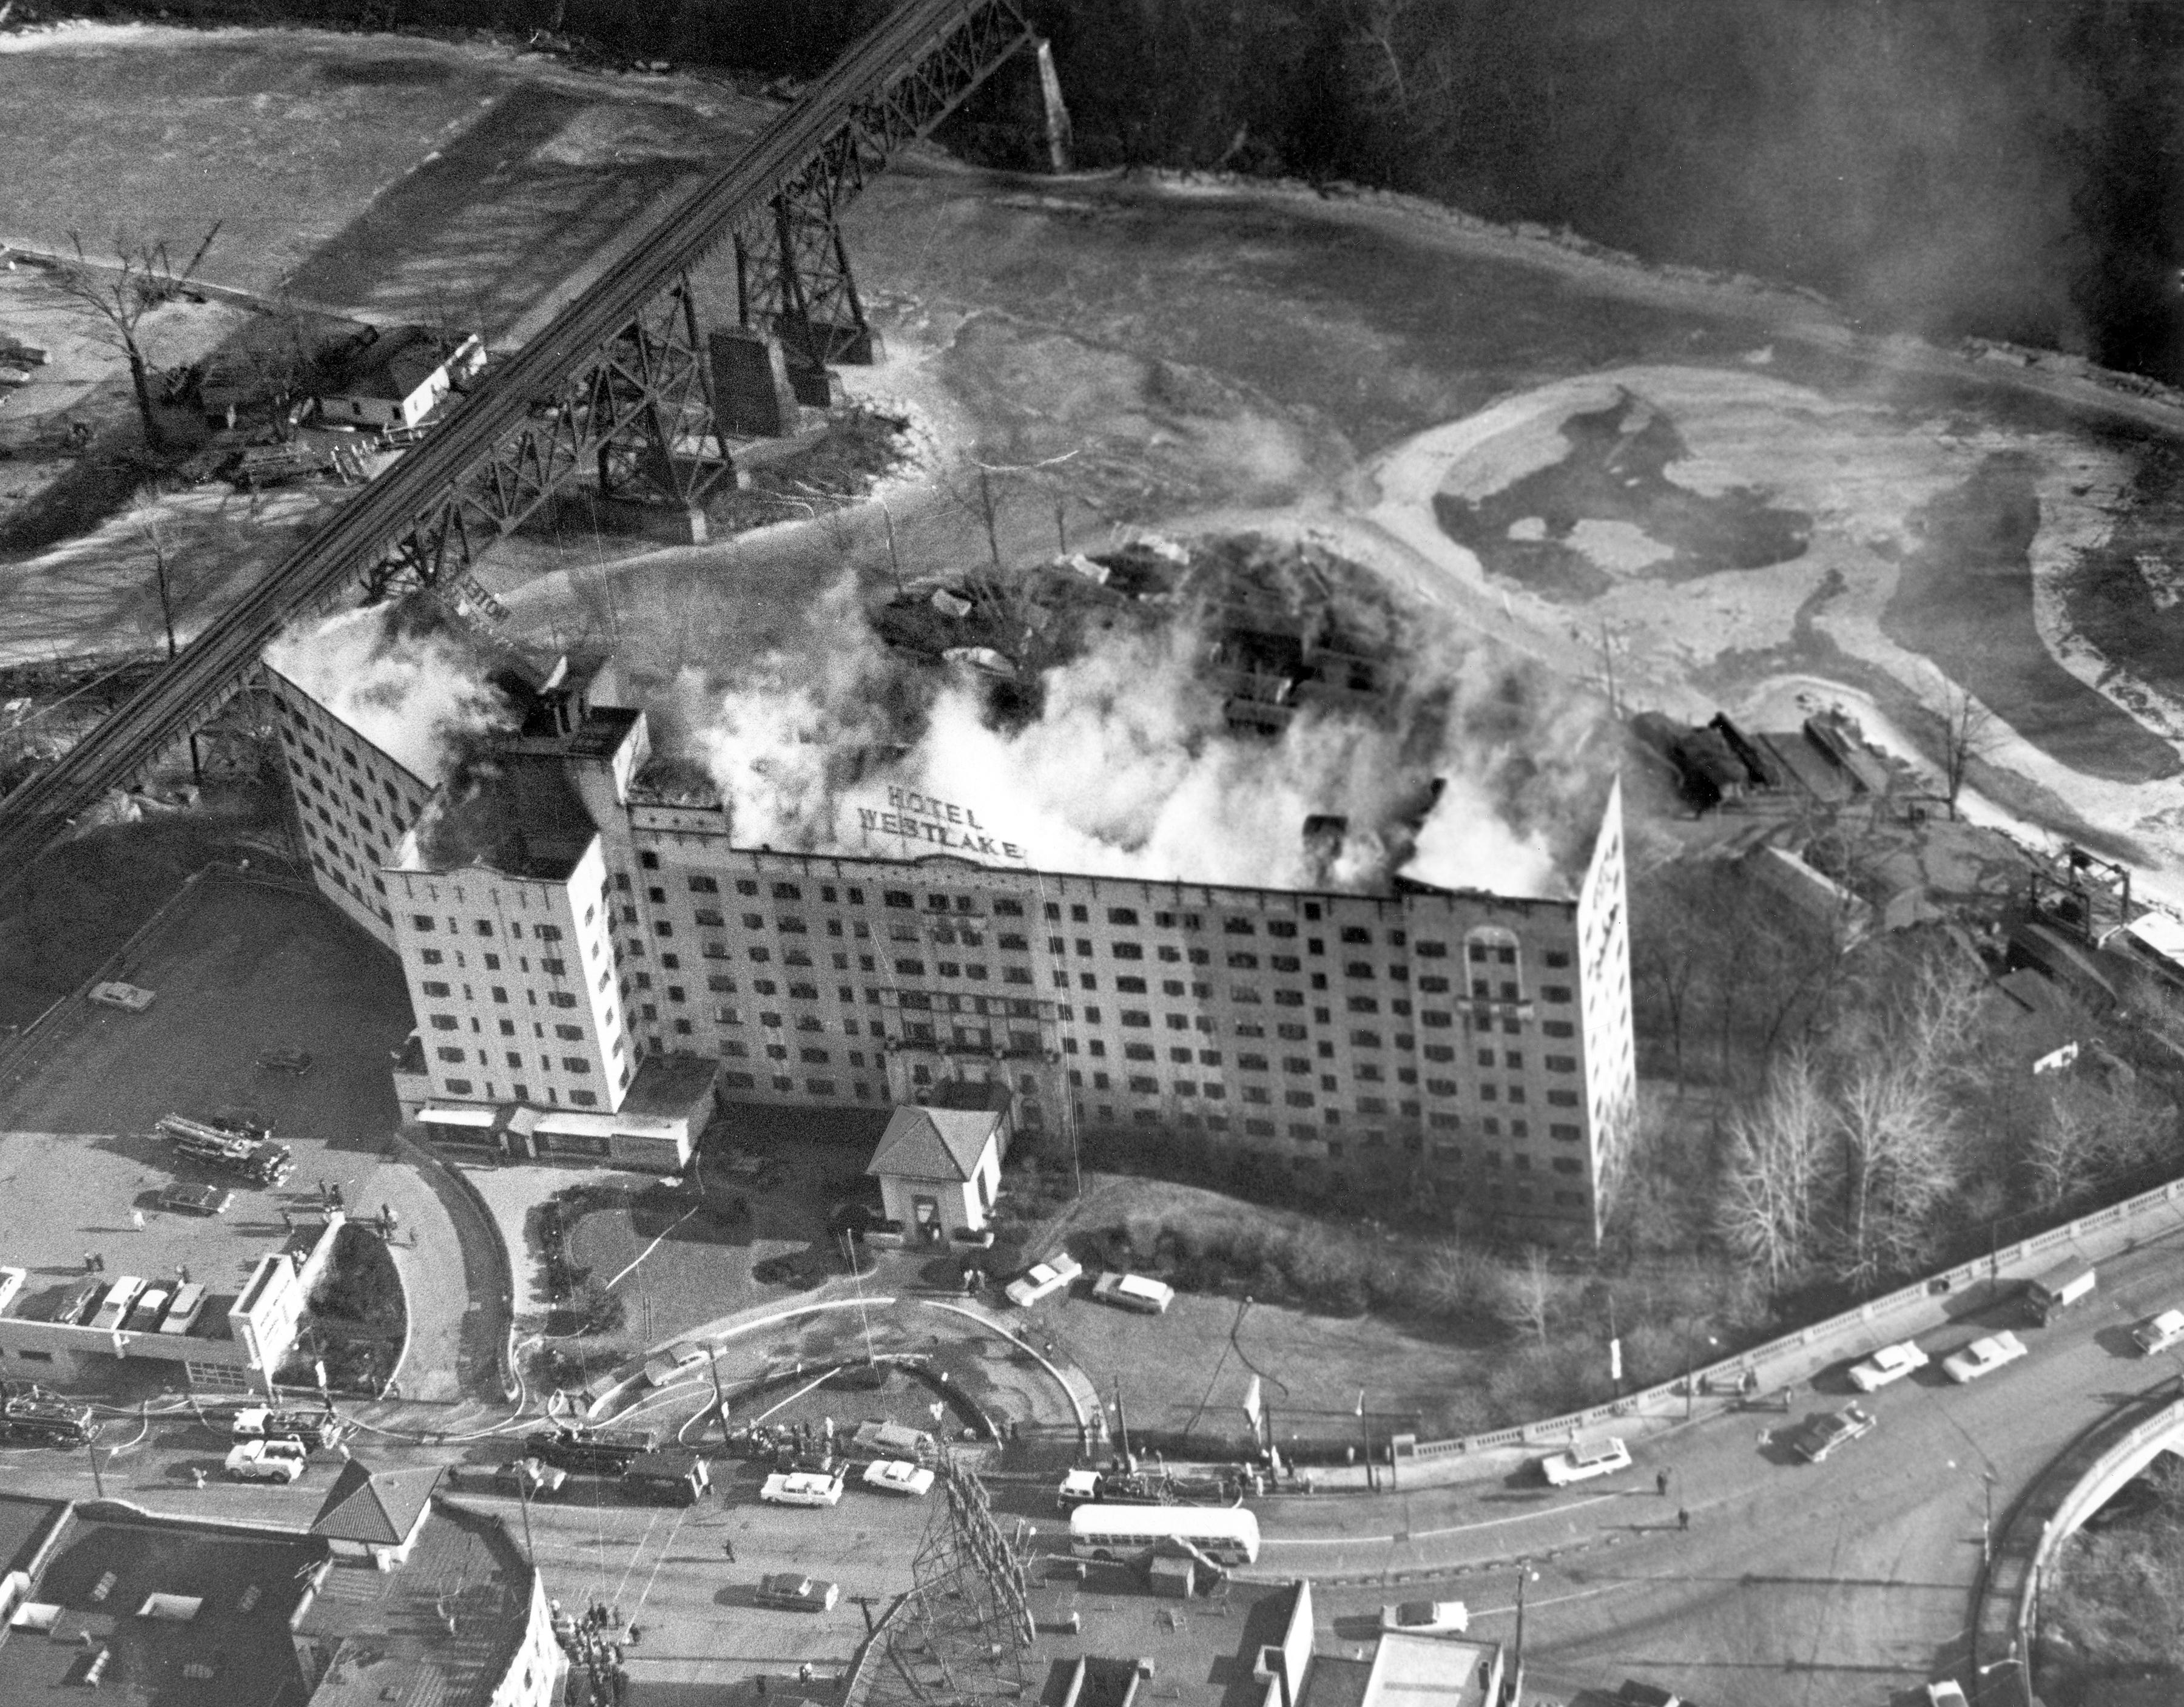 An aerial shot of the Westlake Hotel fire of 25 Jan. 1962